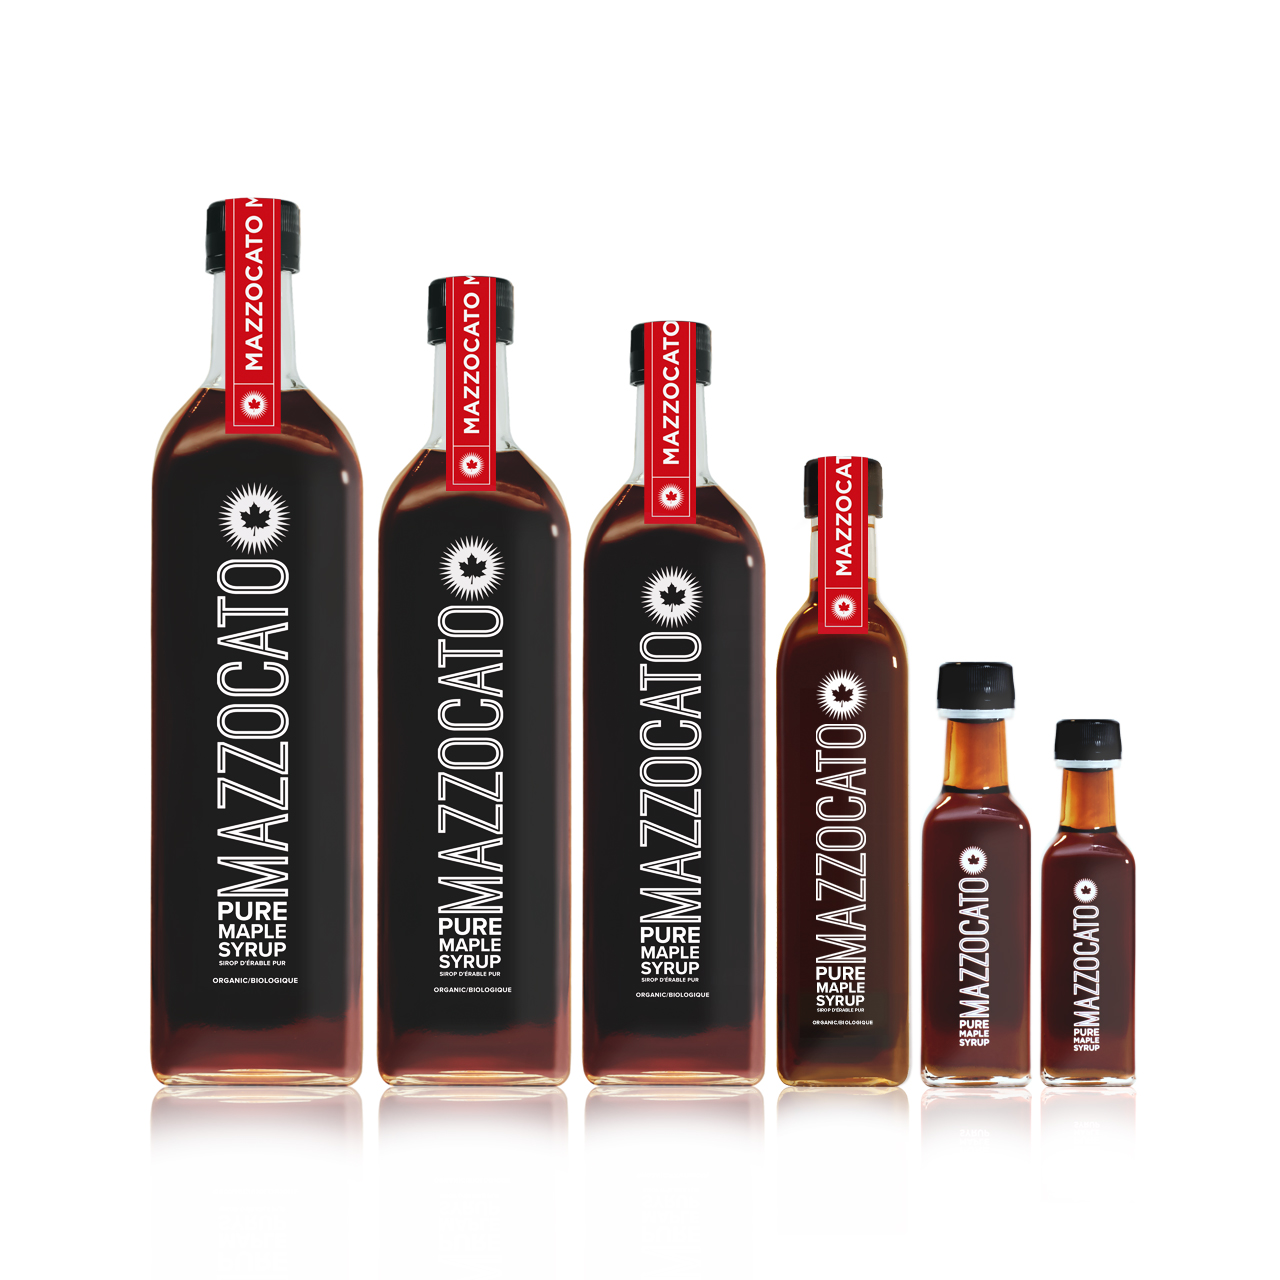 Branding and Packaging Graphic Design of Mazzocato Maple Syrup by BANG! creative strategy by design